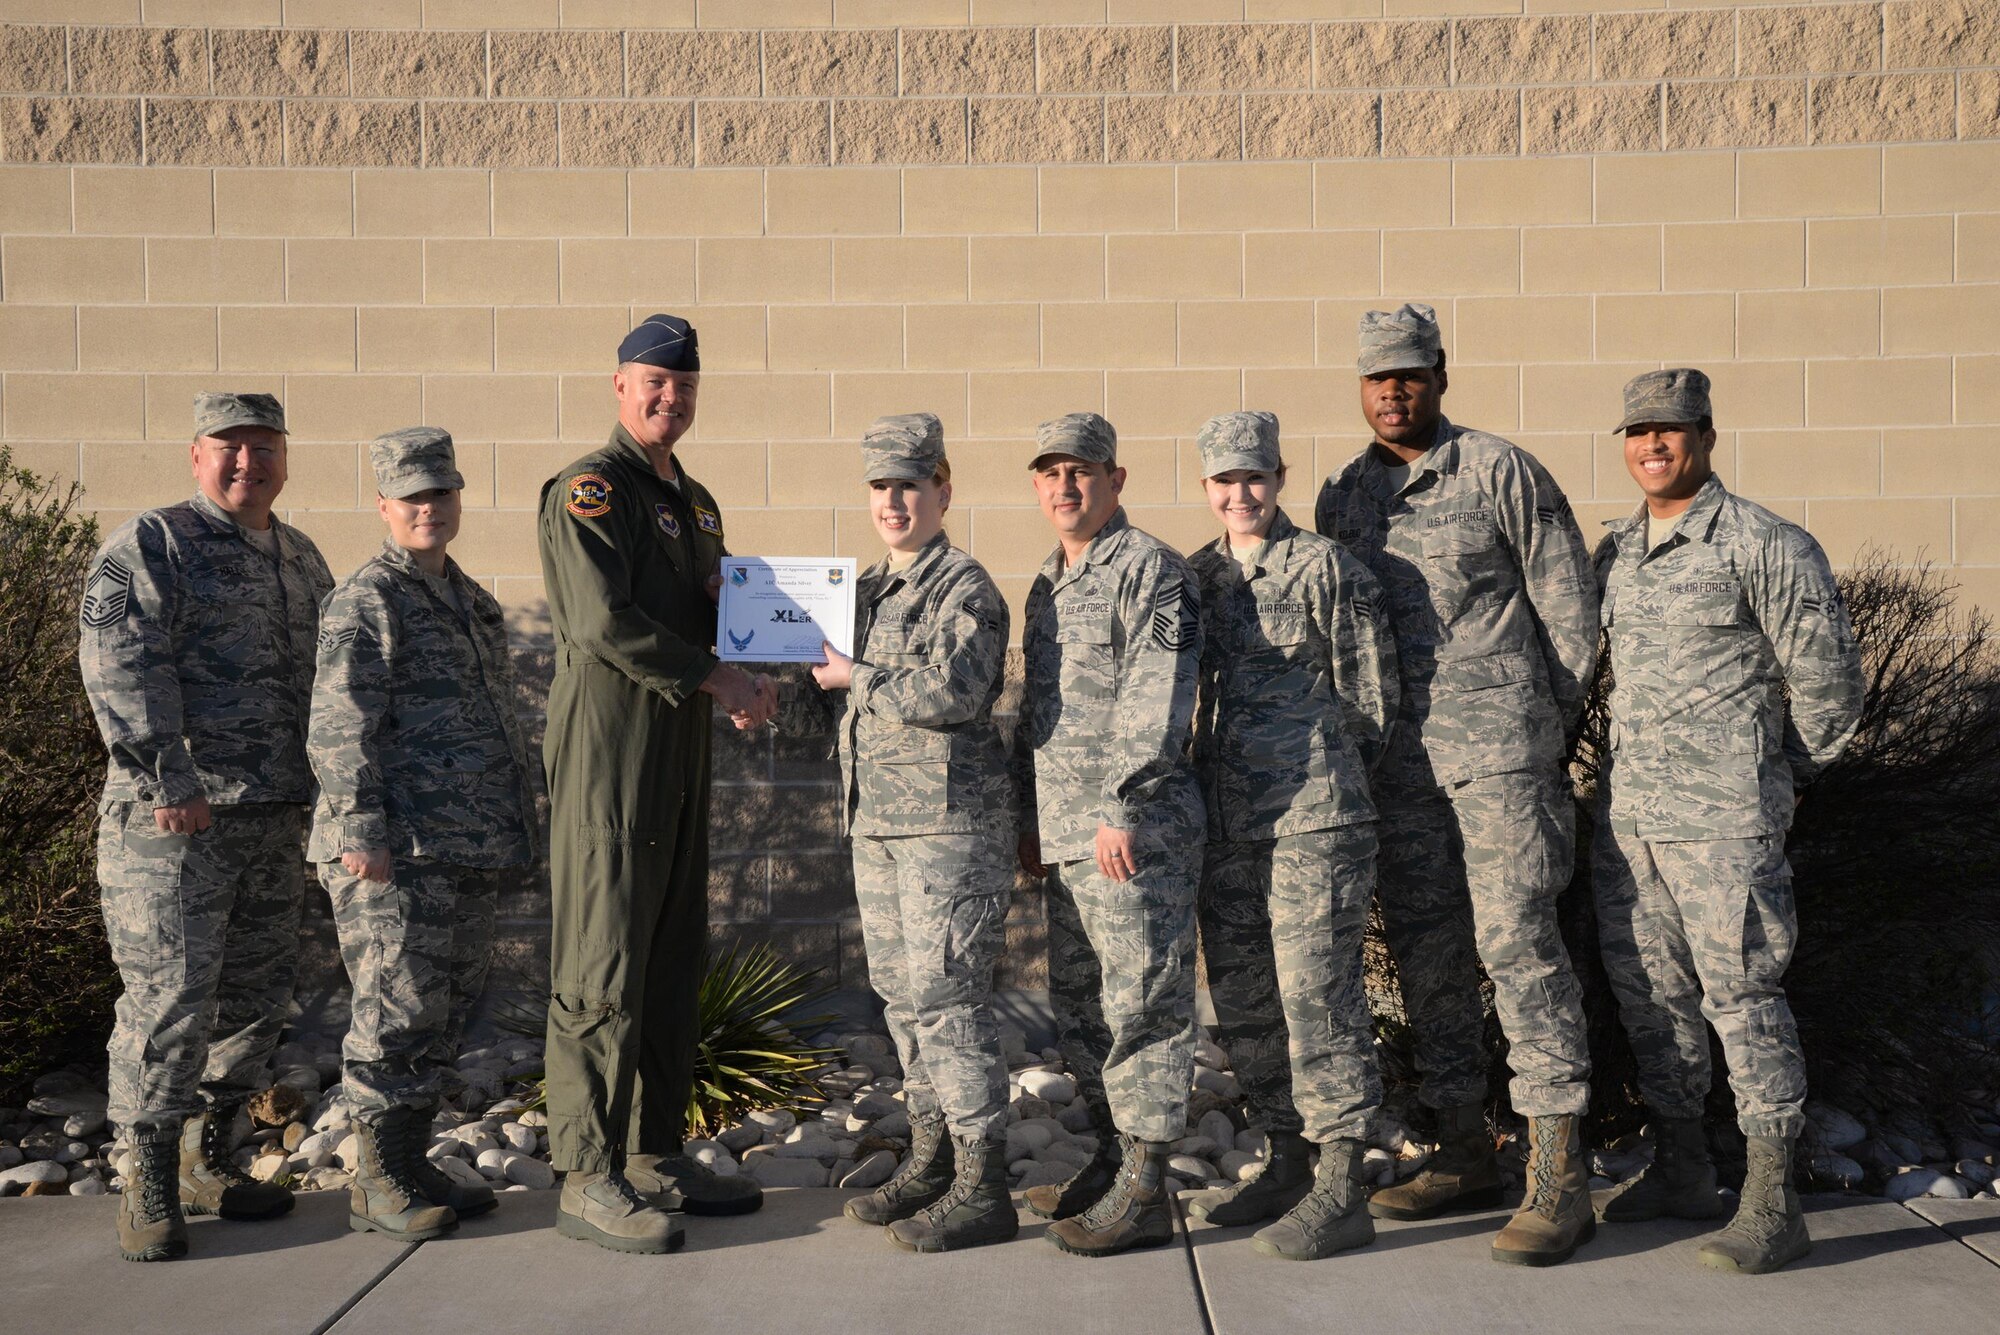 Airman 1st Class Amanda Silver, 47th Medical Group family health office clerk (center), accepts the “XLer of the Week” award from Col. Thomas Shank, 47th Flying Training Wing commander (left), and Chief Master Sgt. George Richey, 47th FTW command chief (right), on Laughlin Air Force Base, Texas, Feb. 22, 2017. The XLer is a weekly award chosen by wing leadership and is presented to those who consistently make outstanding contributions to their unit and Laughlin. (U.S. Air Force photo/Airman 1st Class Daniel Hambor)